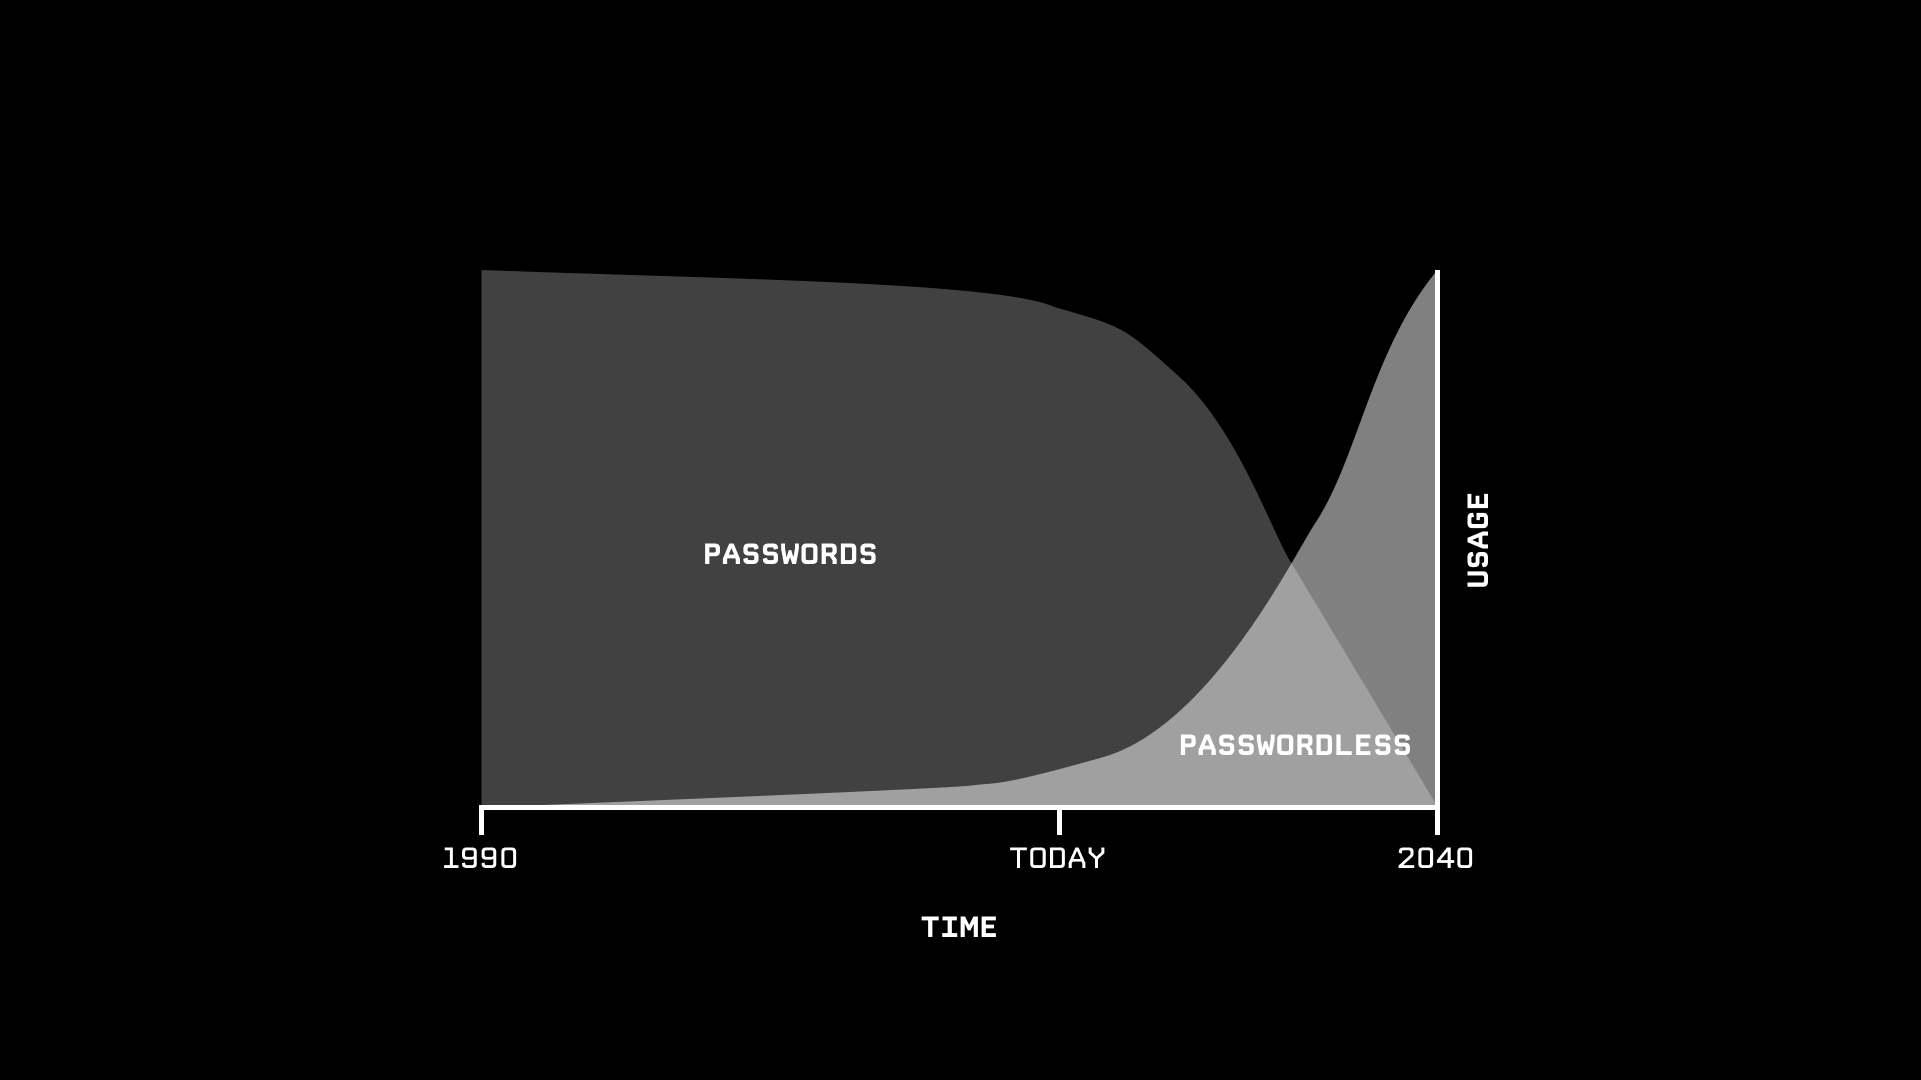 Realistic decline of passwords and adoption of passwordless.